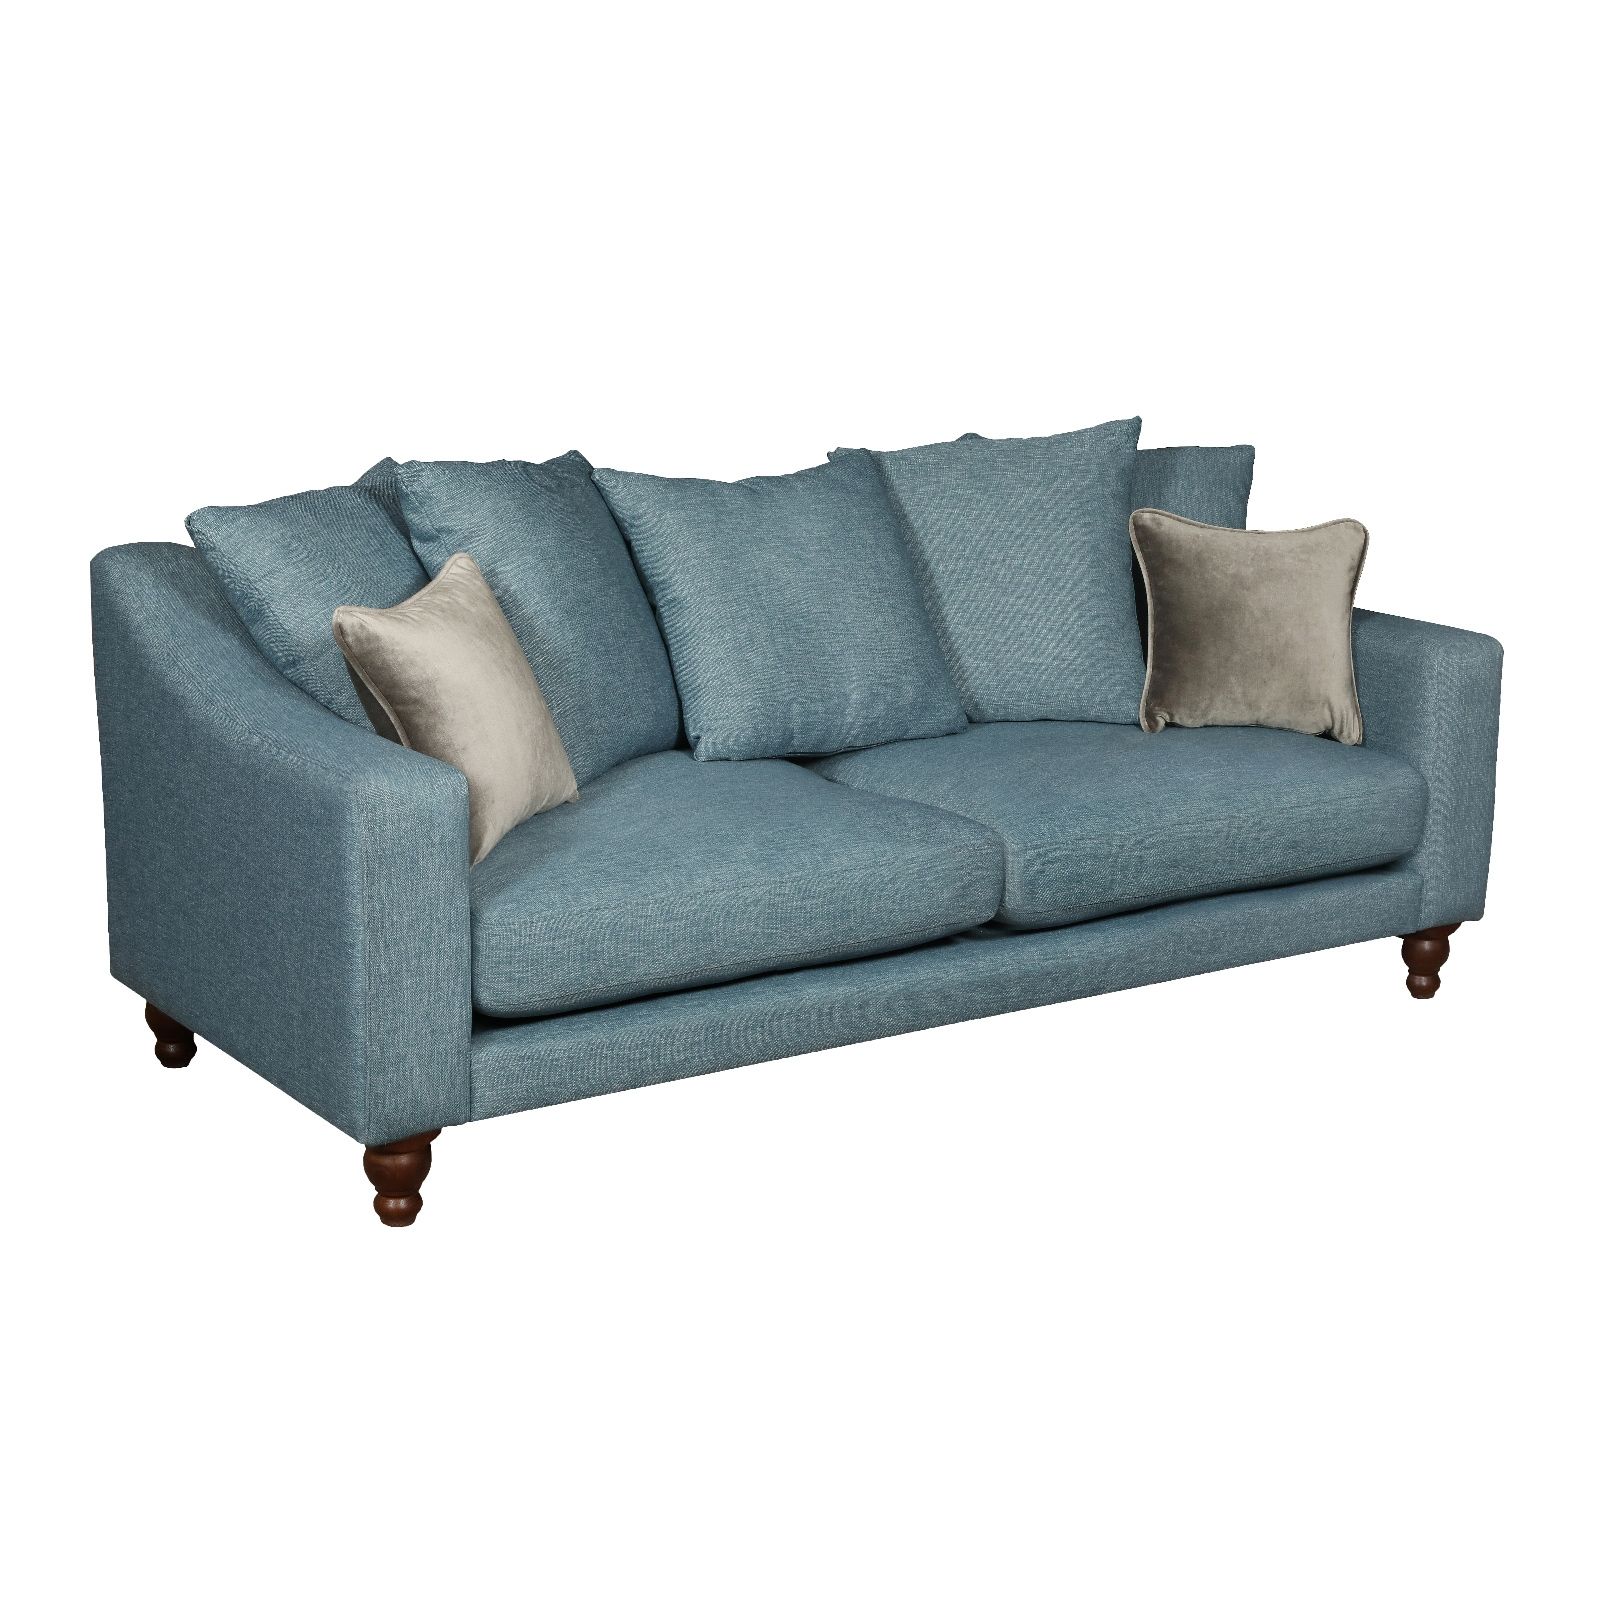 Vintage Penryn Pillowback 3 Seater Sofa – Vintage Kernow – Carlton With Sofas With Pillowback Wood Bases (View 17 of 20)